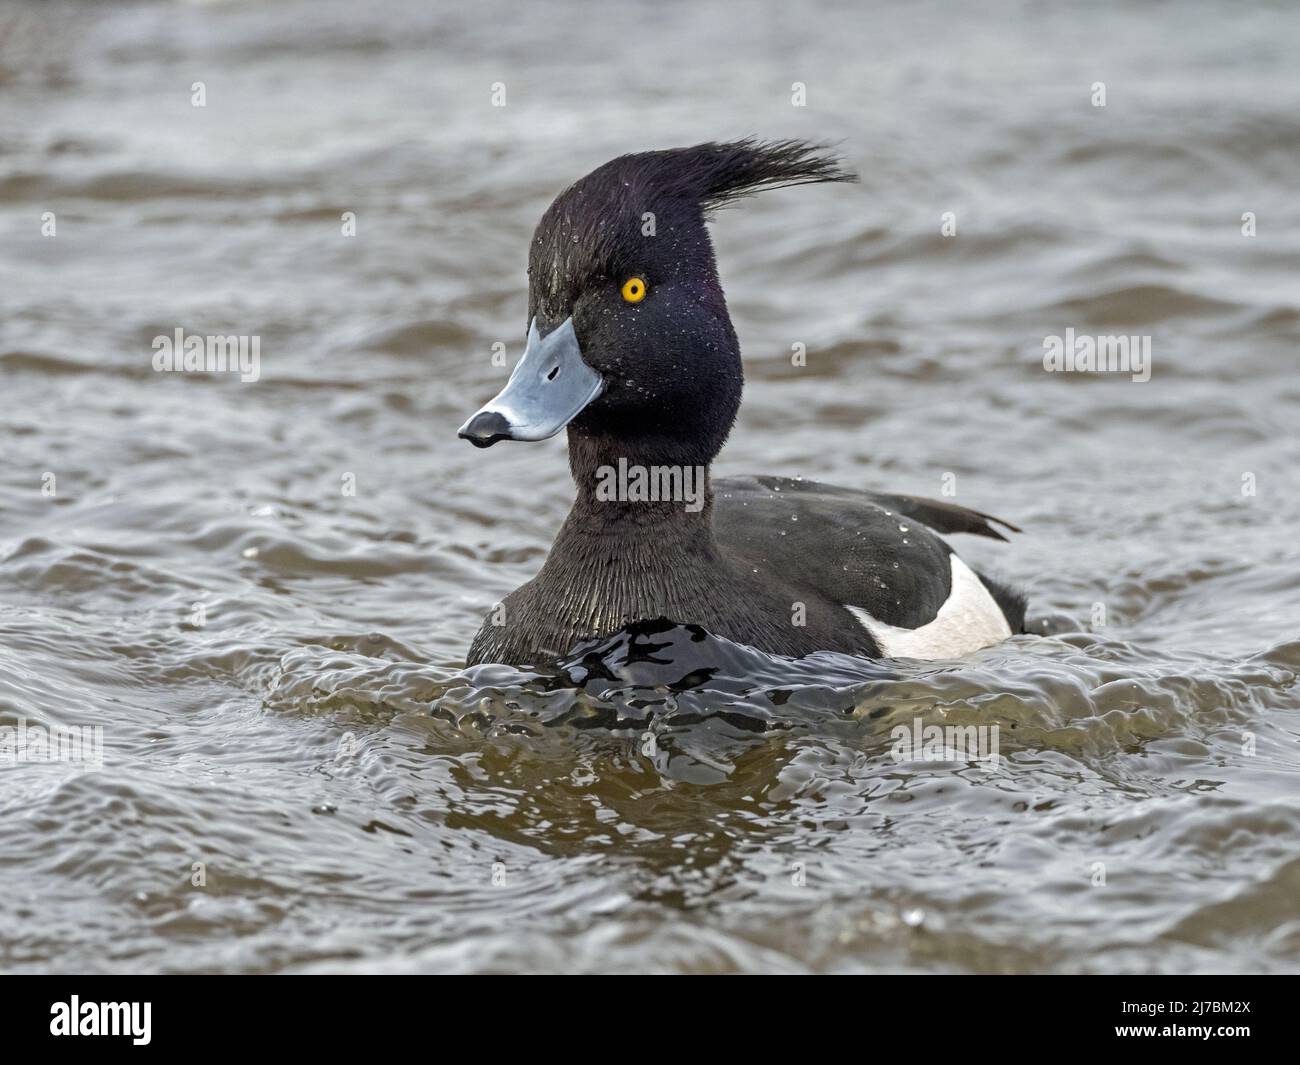 Male Tufted Duck (Aythya fuligula) with crest blowing in strong wind, Welney WWT, Norfolk Stock Photo